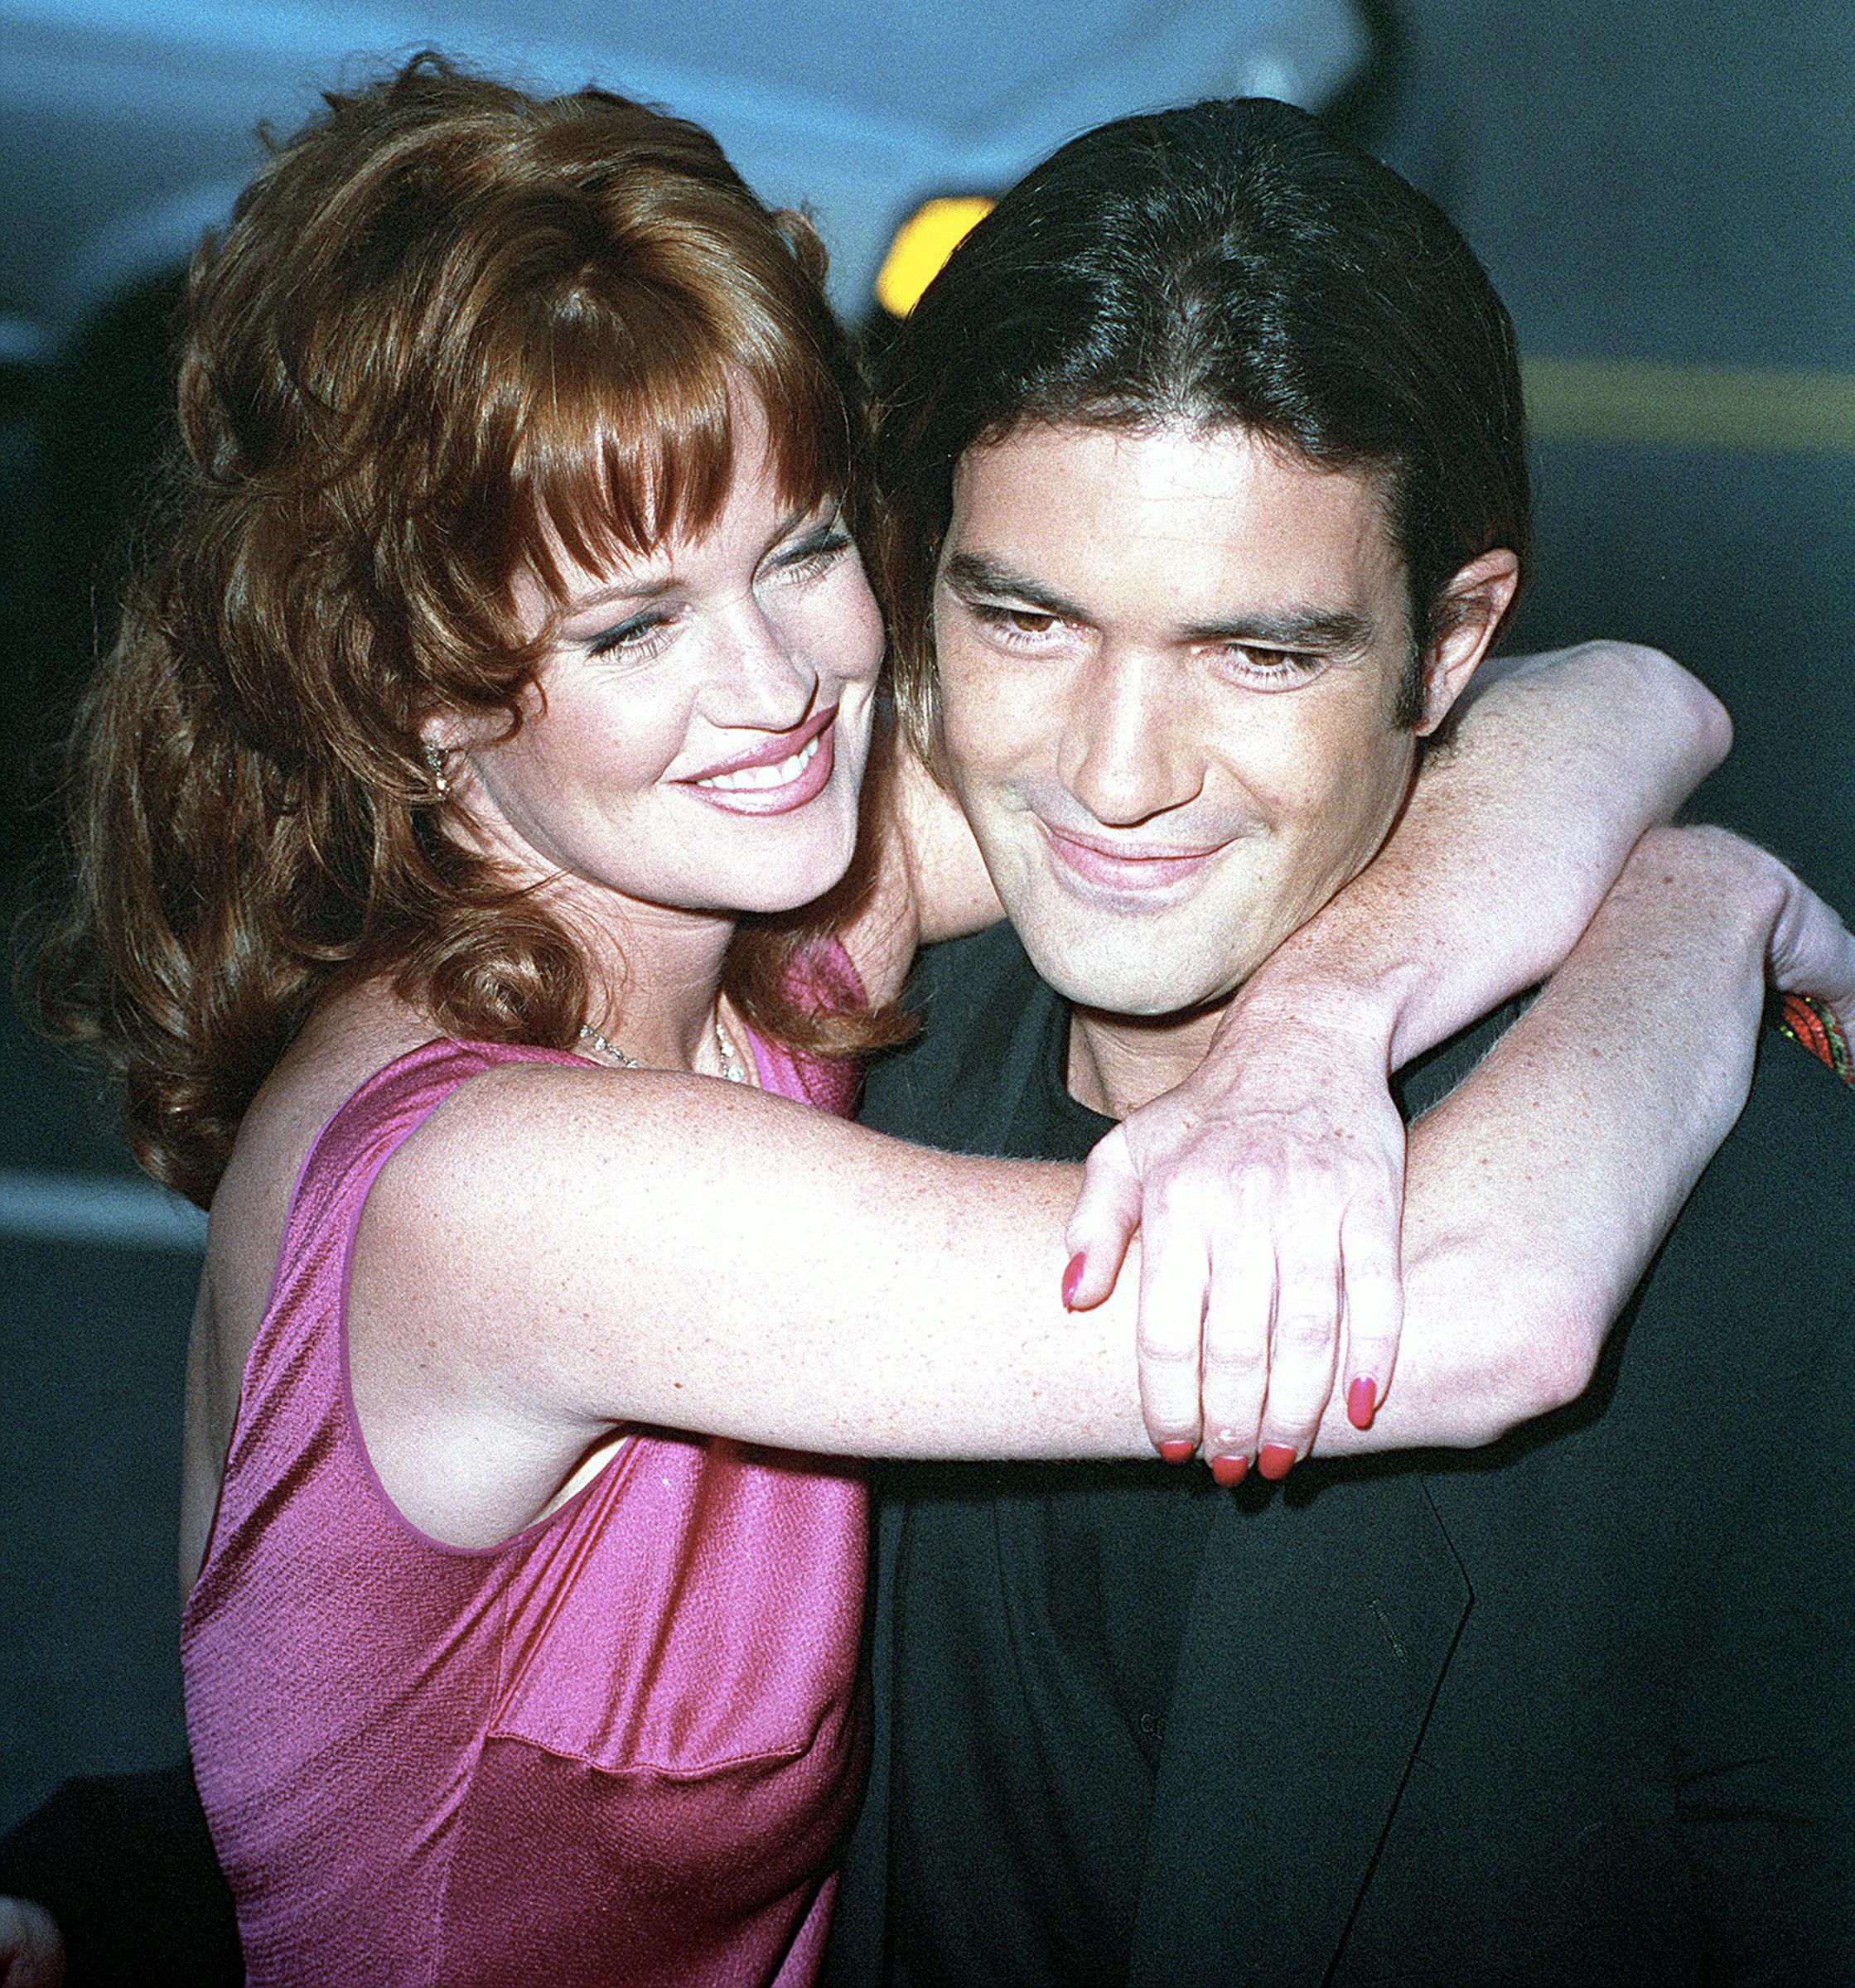 Melanie Griffith and Antonio Banderas at the premiere of "Desperado" on August 21, 1995, in Los Angeles, California. | Source: Getty Images